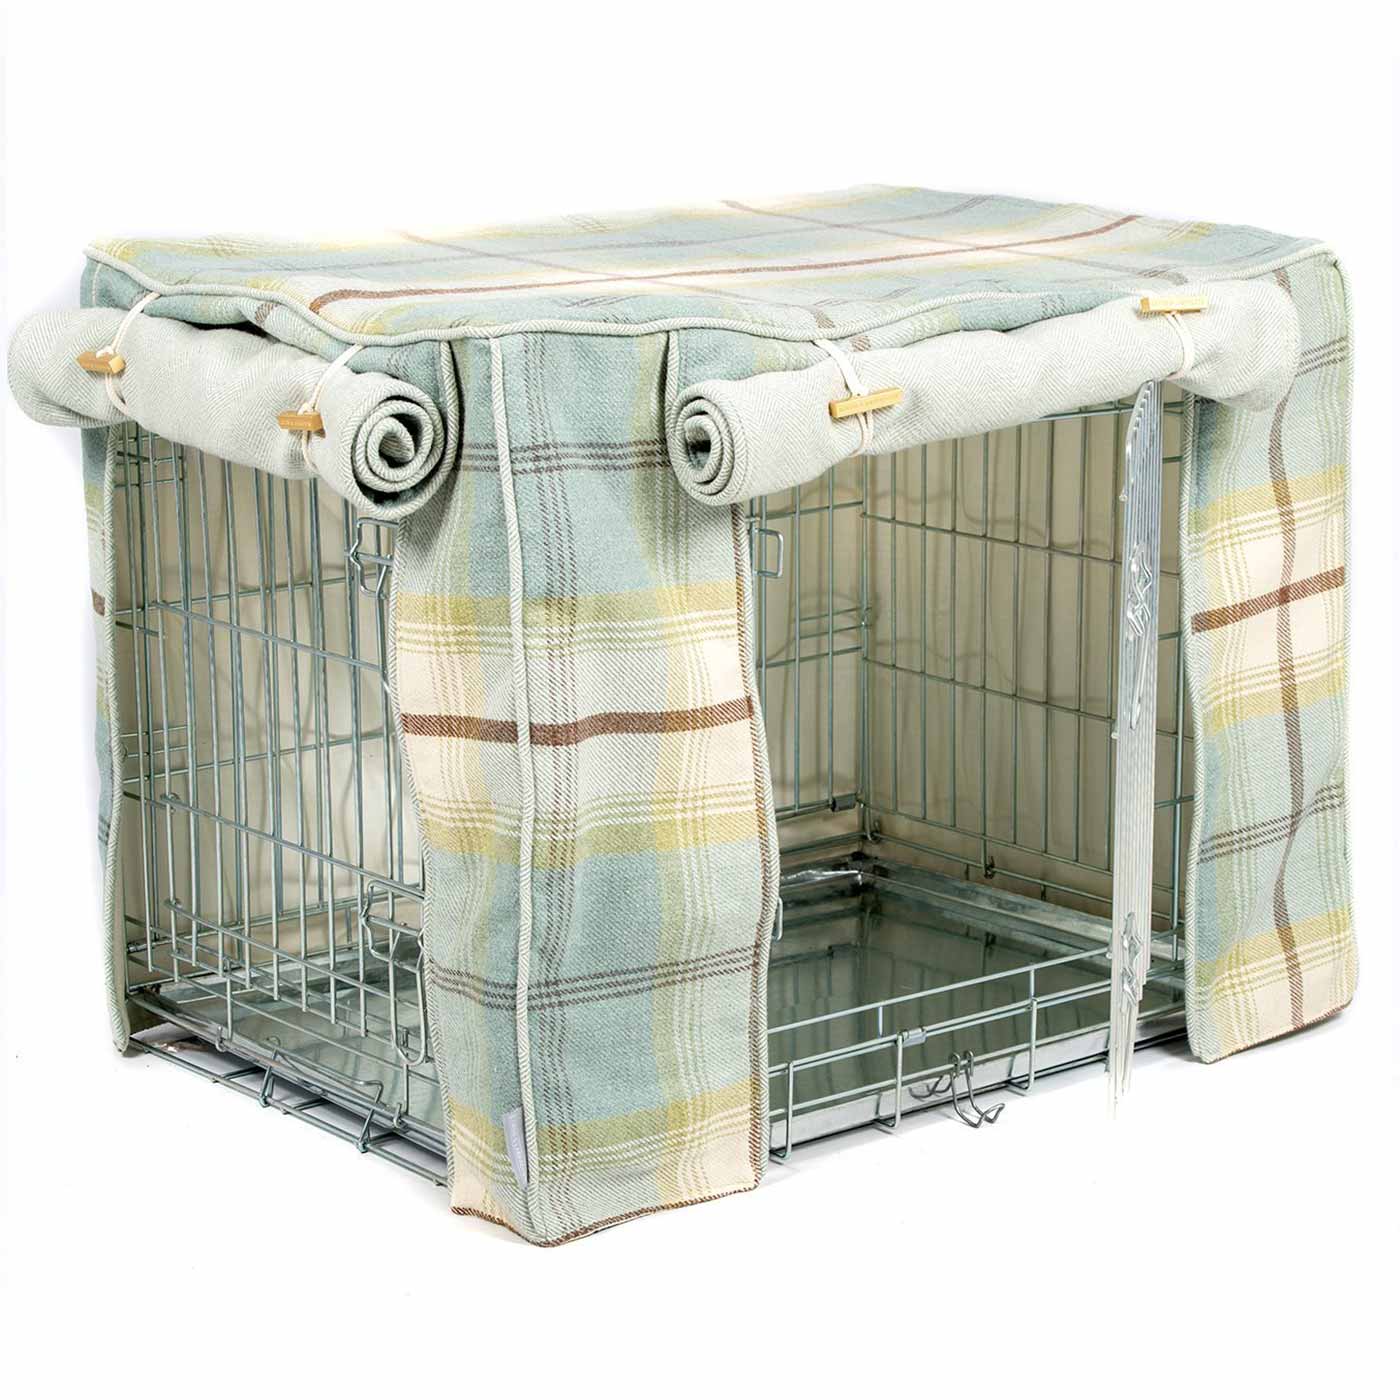 Discover our Luxury Dog Crate Cover, in Balmoral Duck Egg Tweed. The Perfect Dog Crate Accessory, Available To Personalise Now at Lords & Labradors